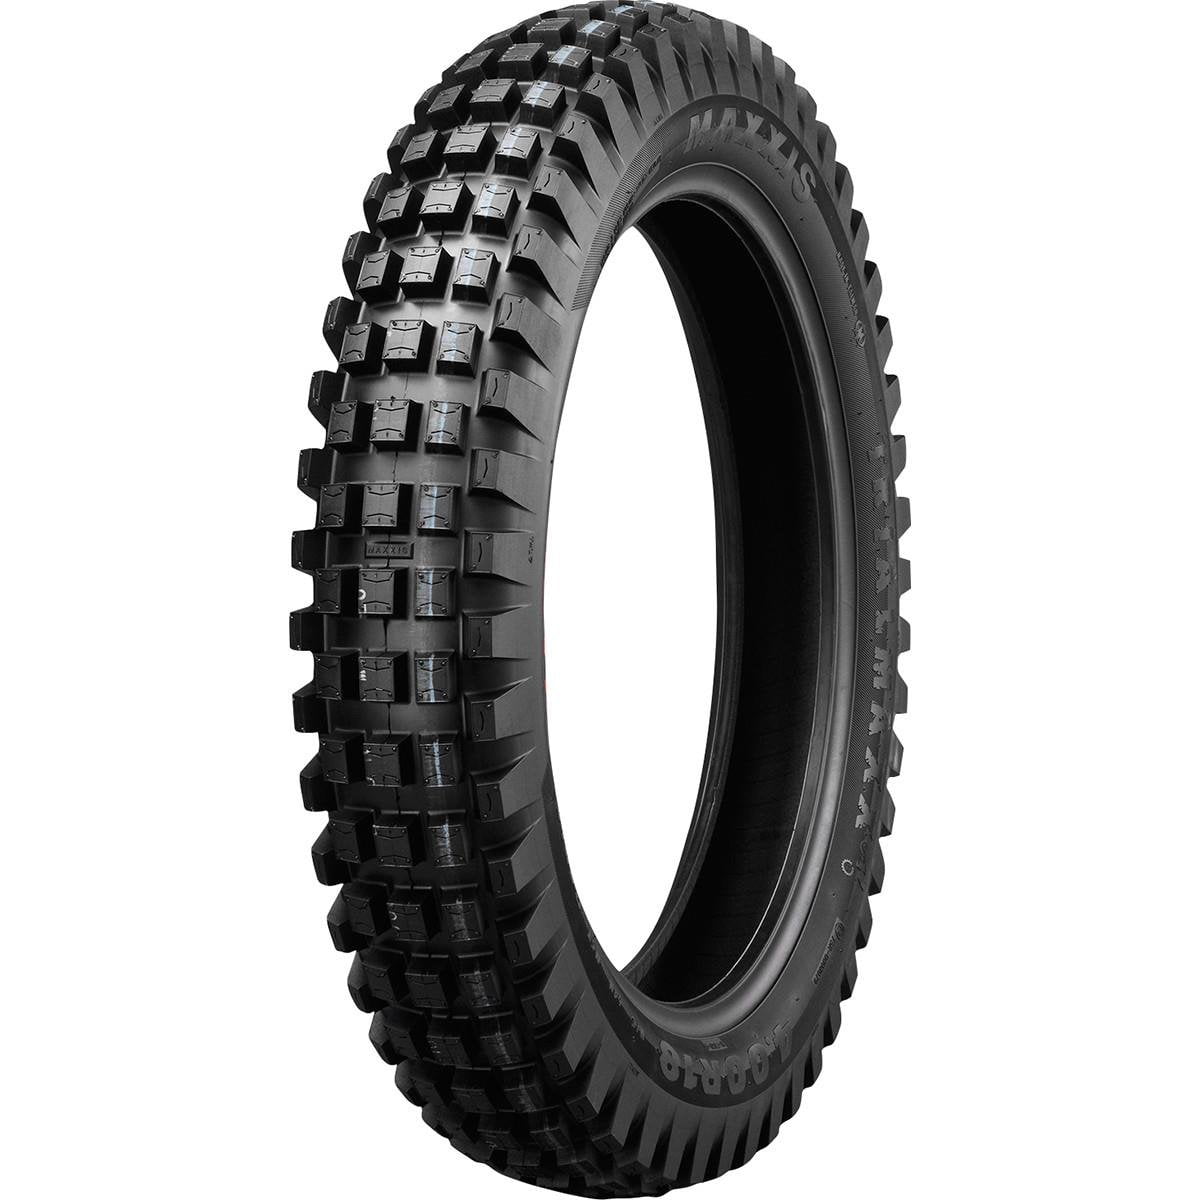 Maxxis Tire Discount Code